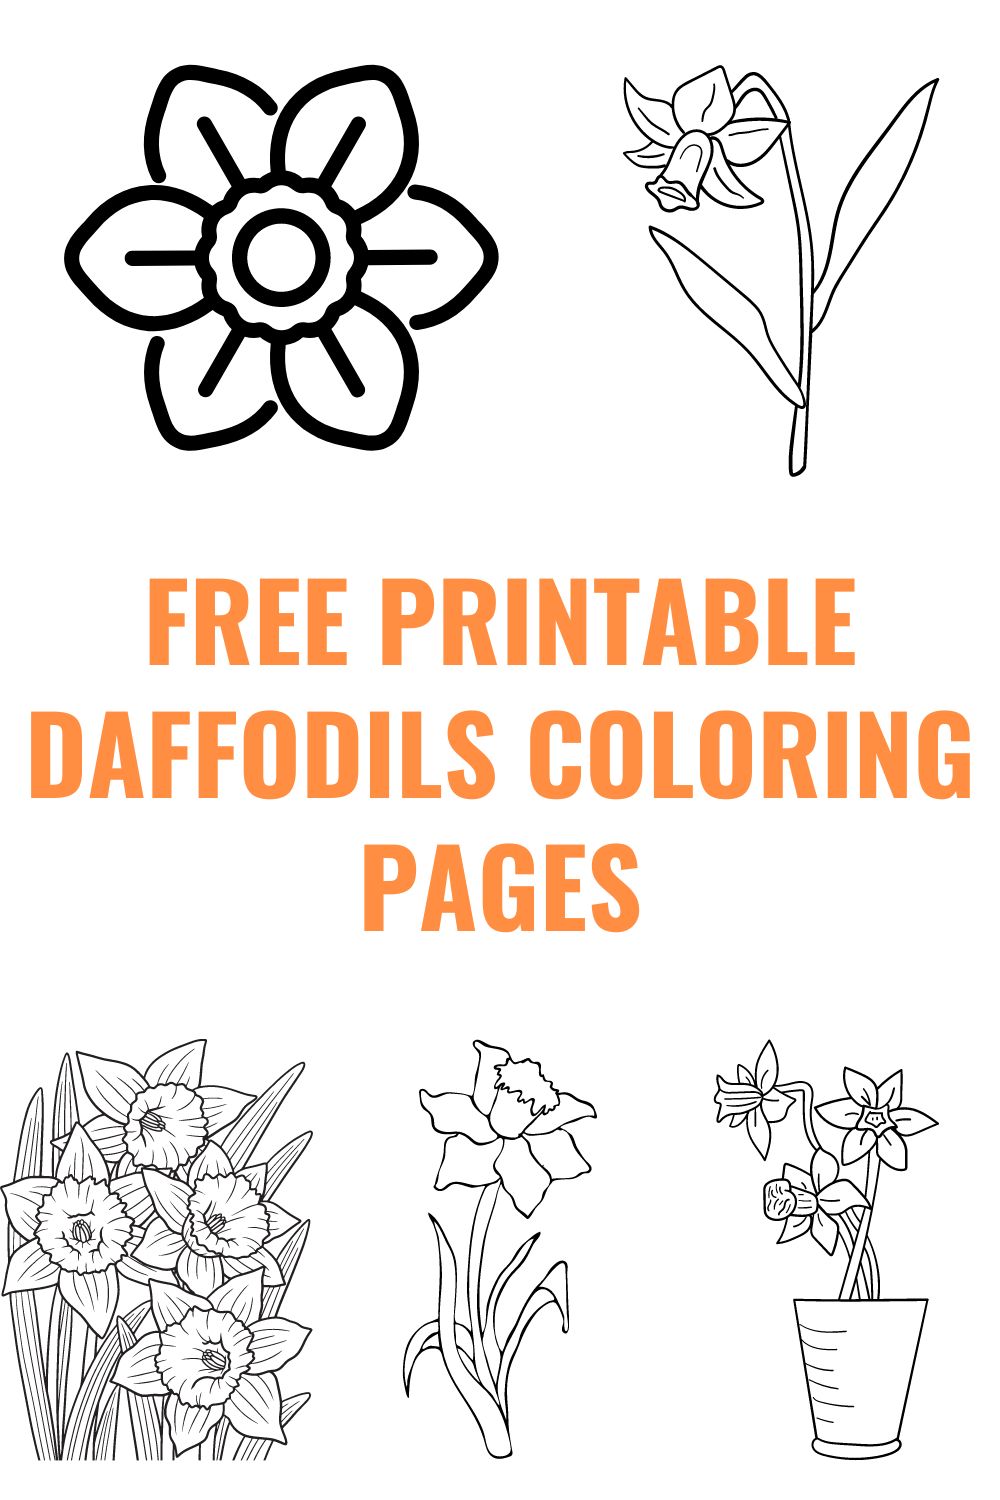 Free printable daffodils coloring pages. 